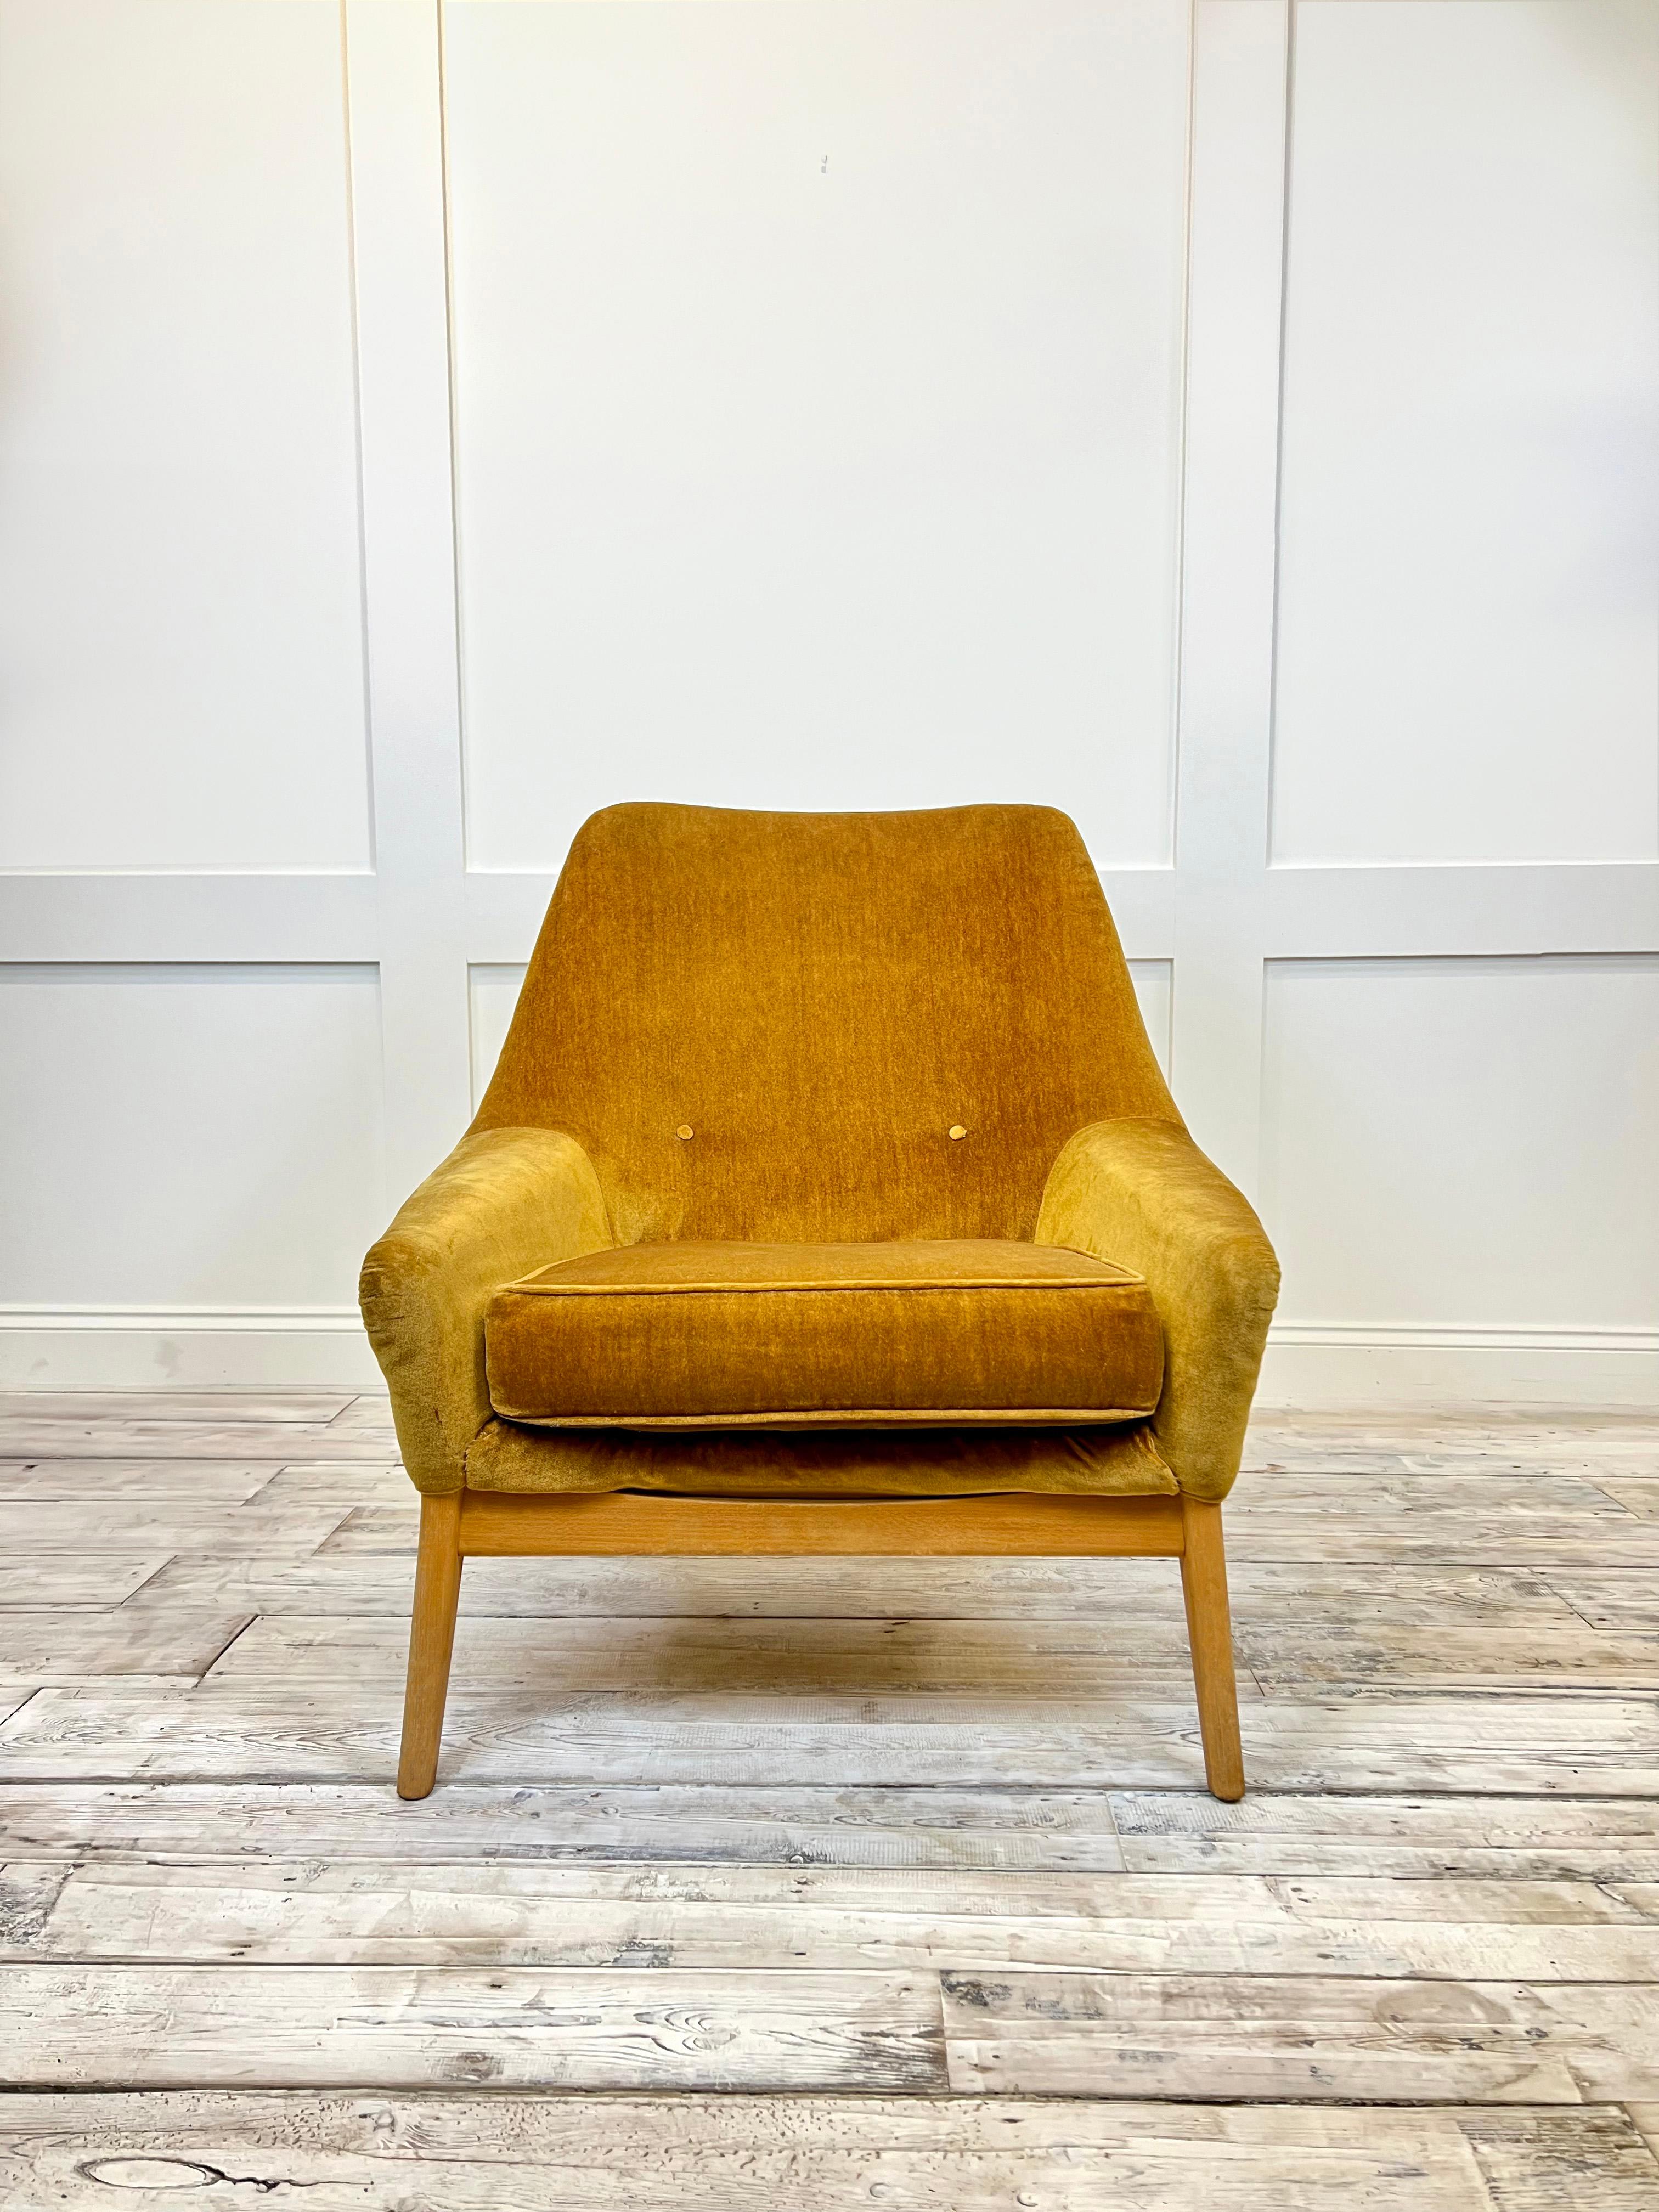 This British design iconic lounge chair has a pleasant sculpted silhouette with the innovative use of moulded plastic for it's shell base covered with a beautiful Honey Mustard Velour upholstery. It draws inspiration from the futuristic mood of